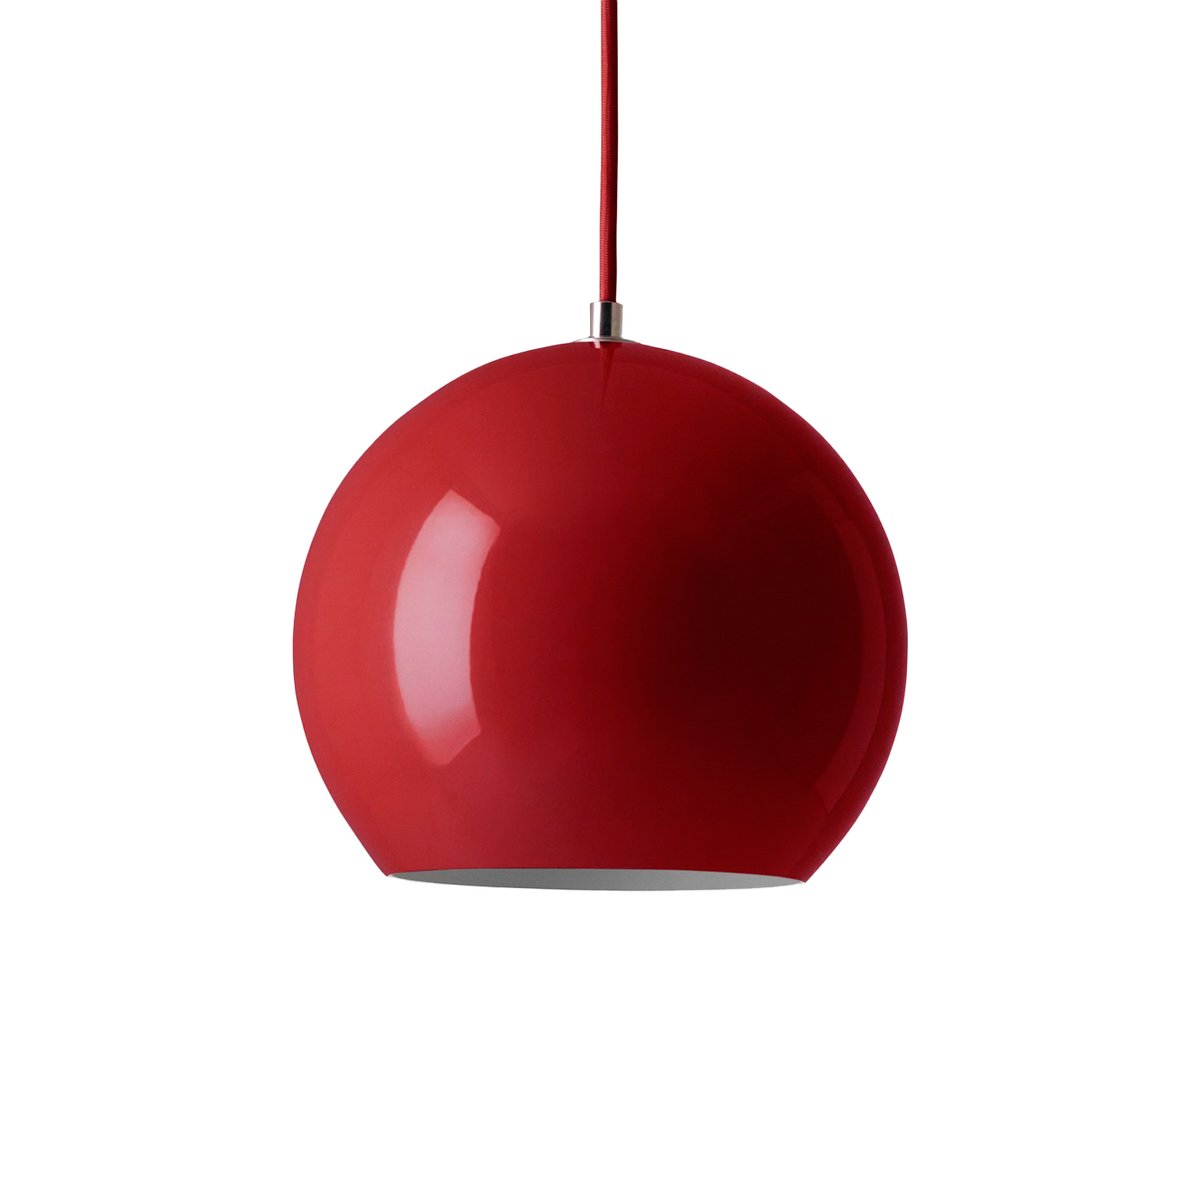 &Tradition Topan VP6 lamp Vermilion red